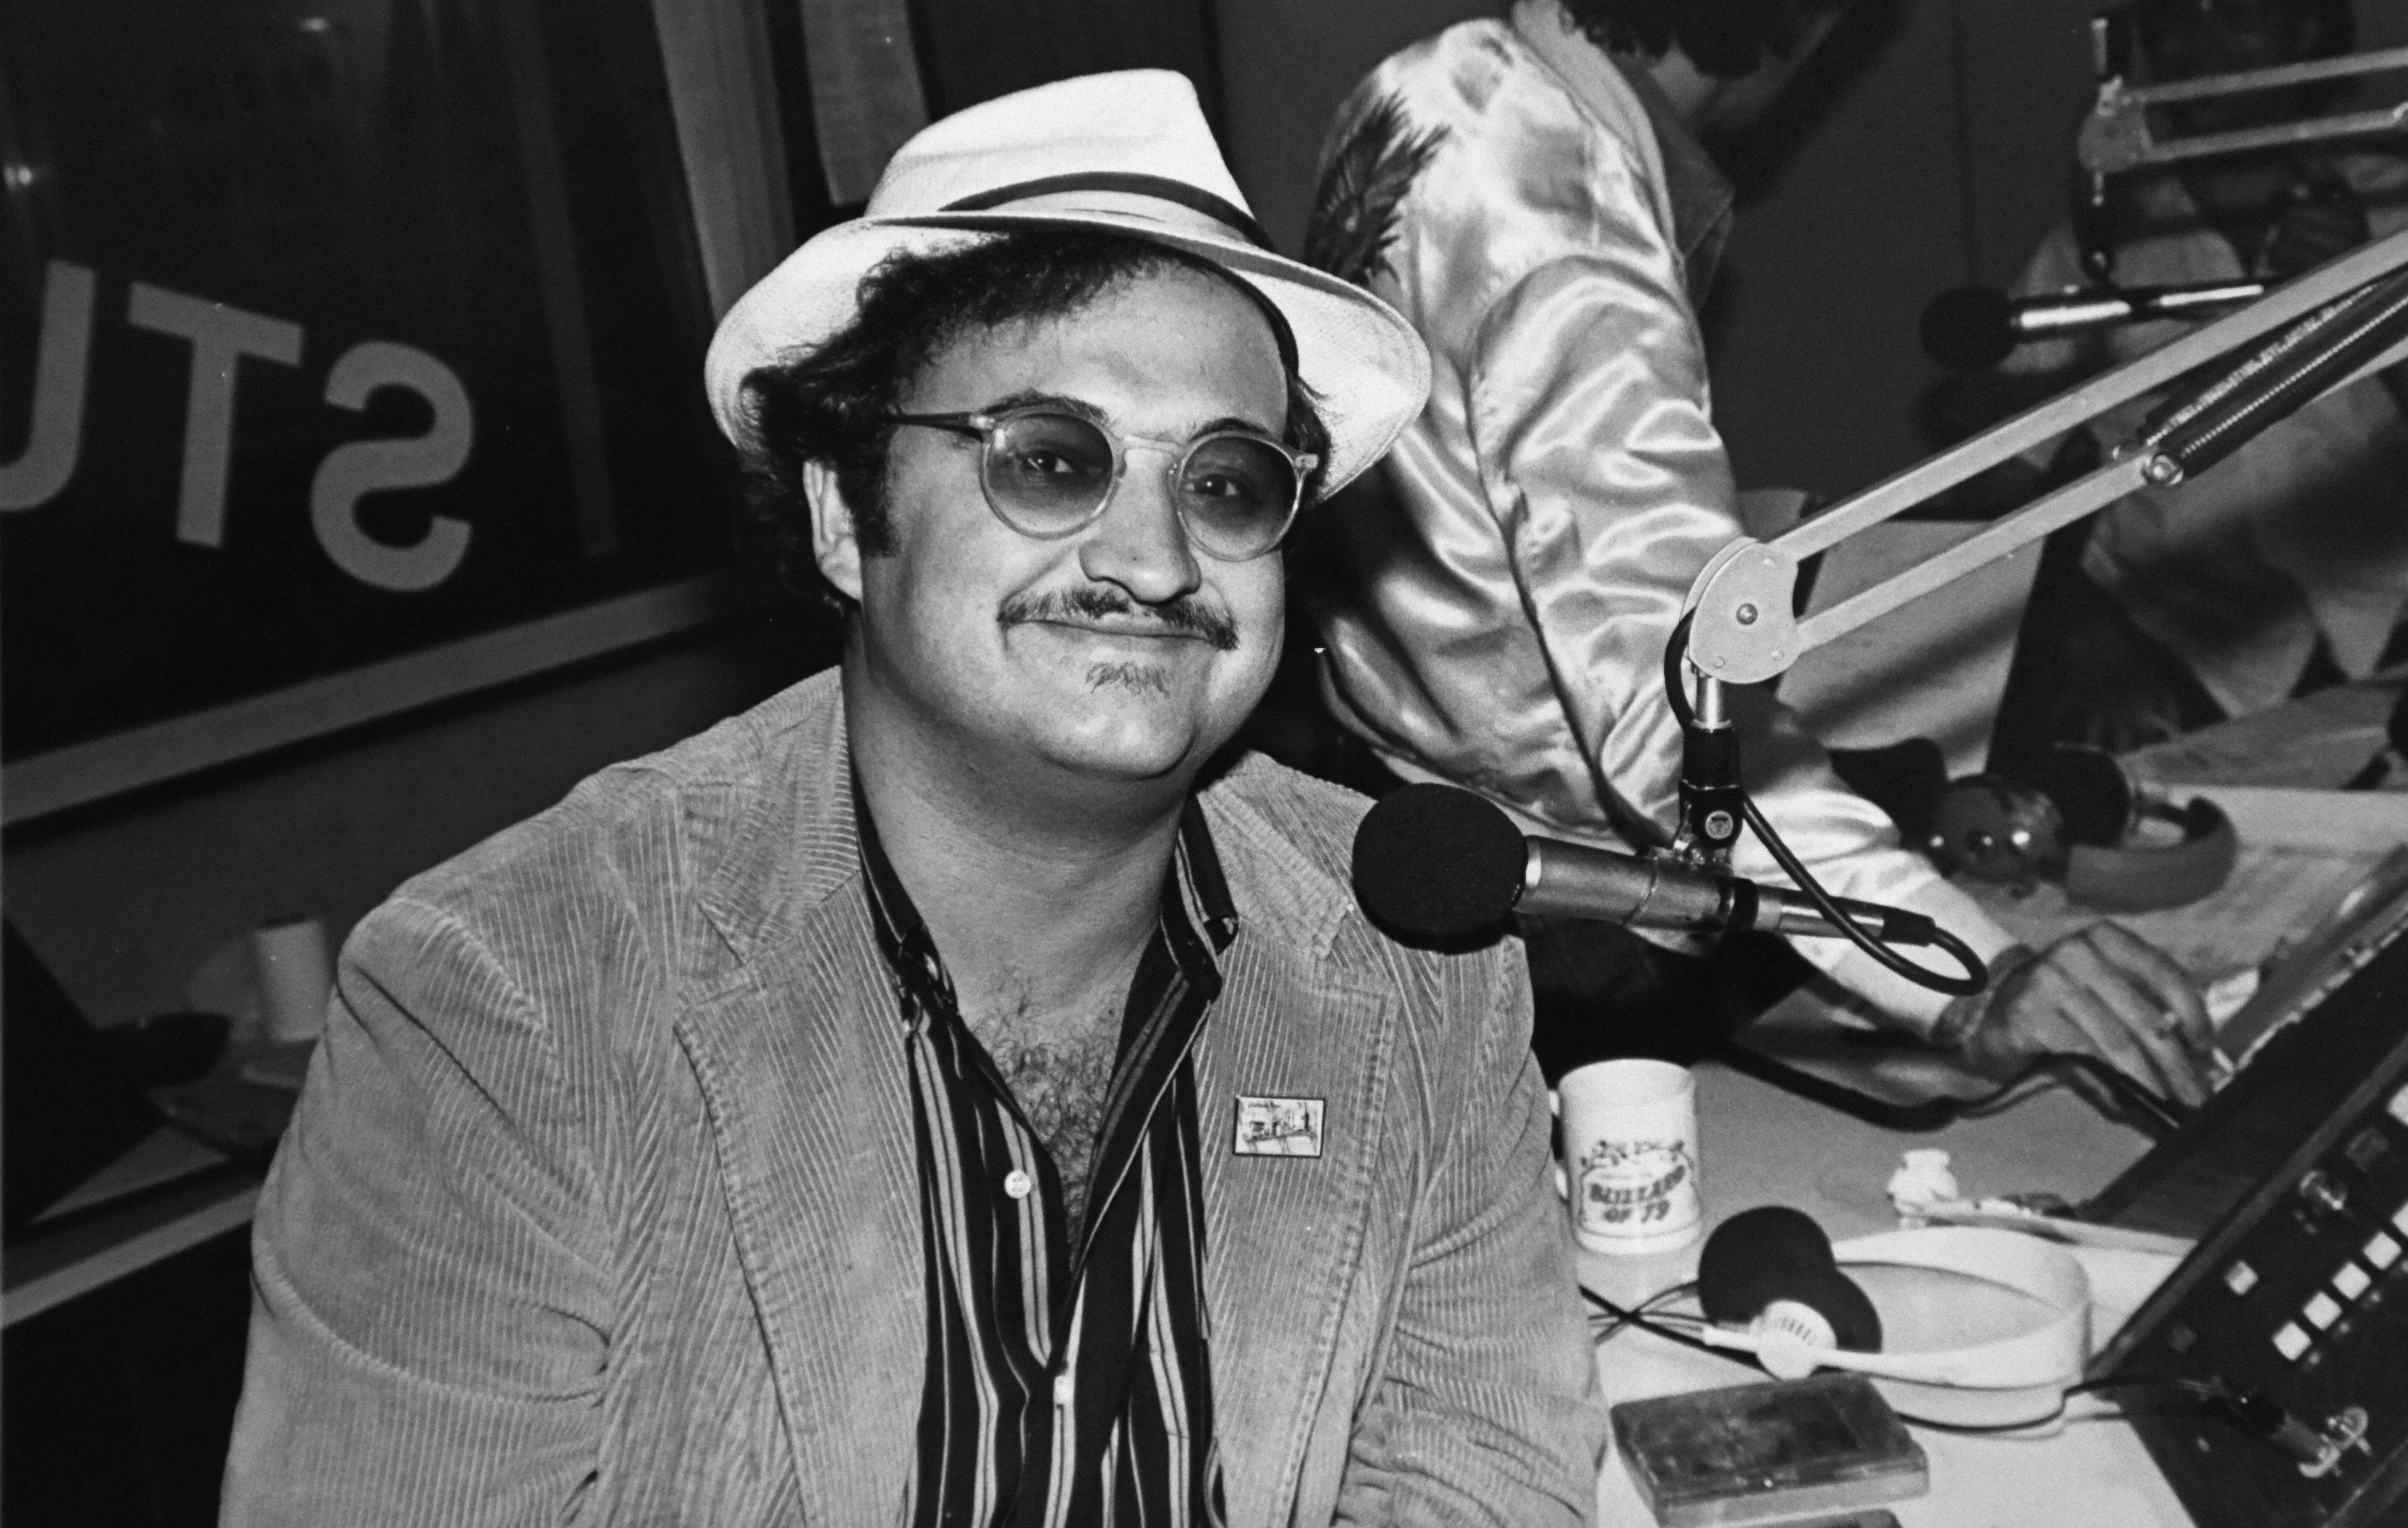 John Belushi promoting his movie "The Blues Brothers" on the radio in Chicago, Illinois in the 1980 summer. | Source: Getty Images